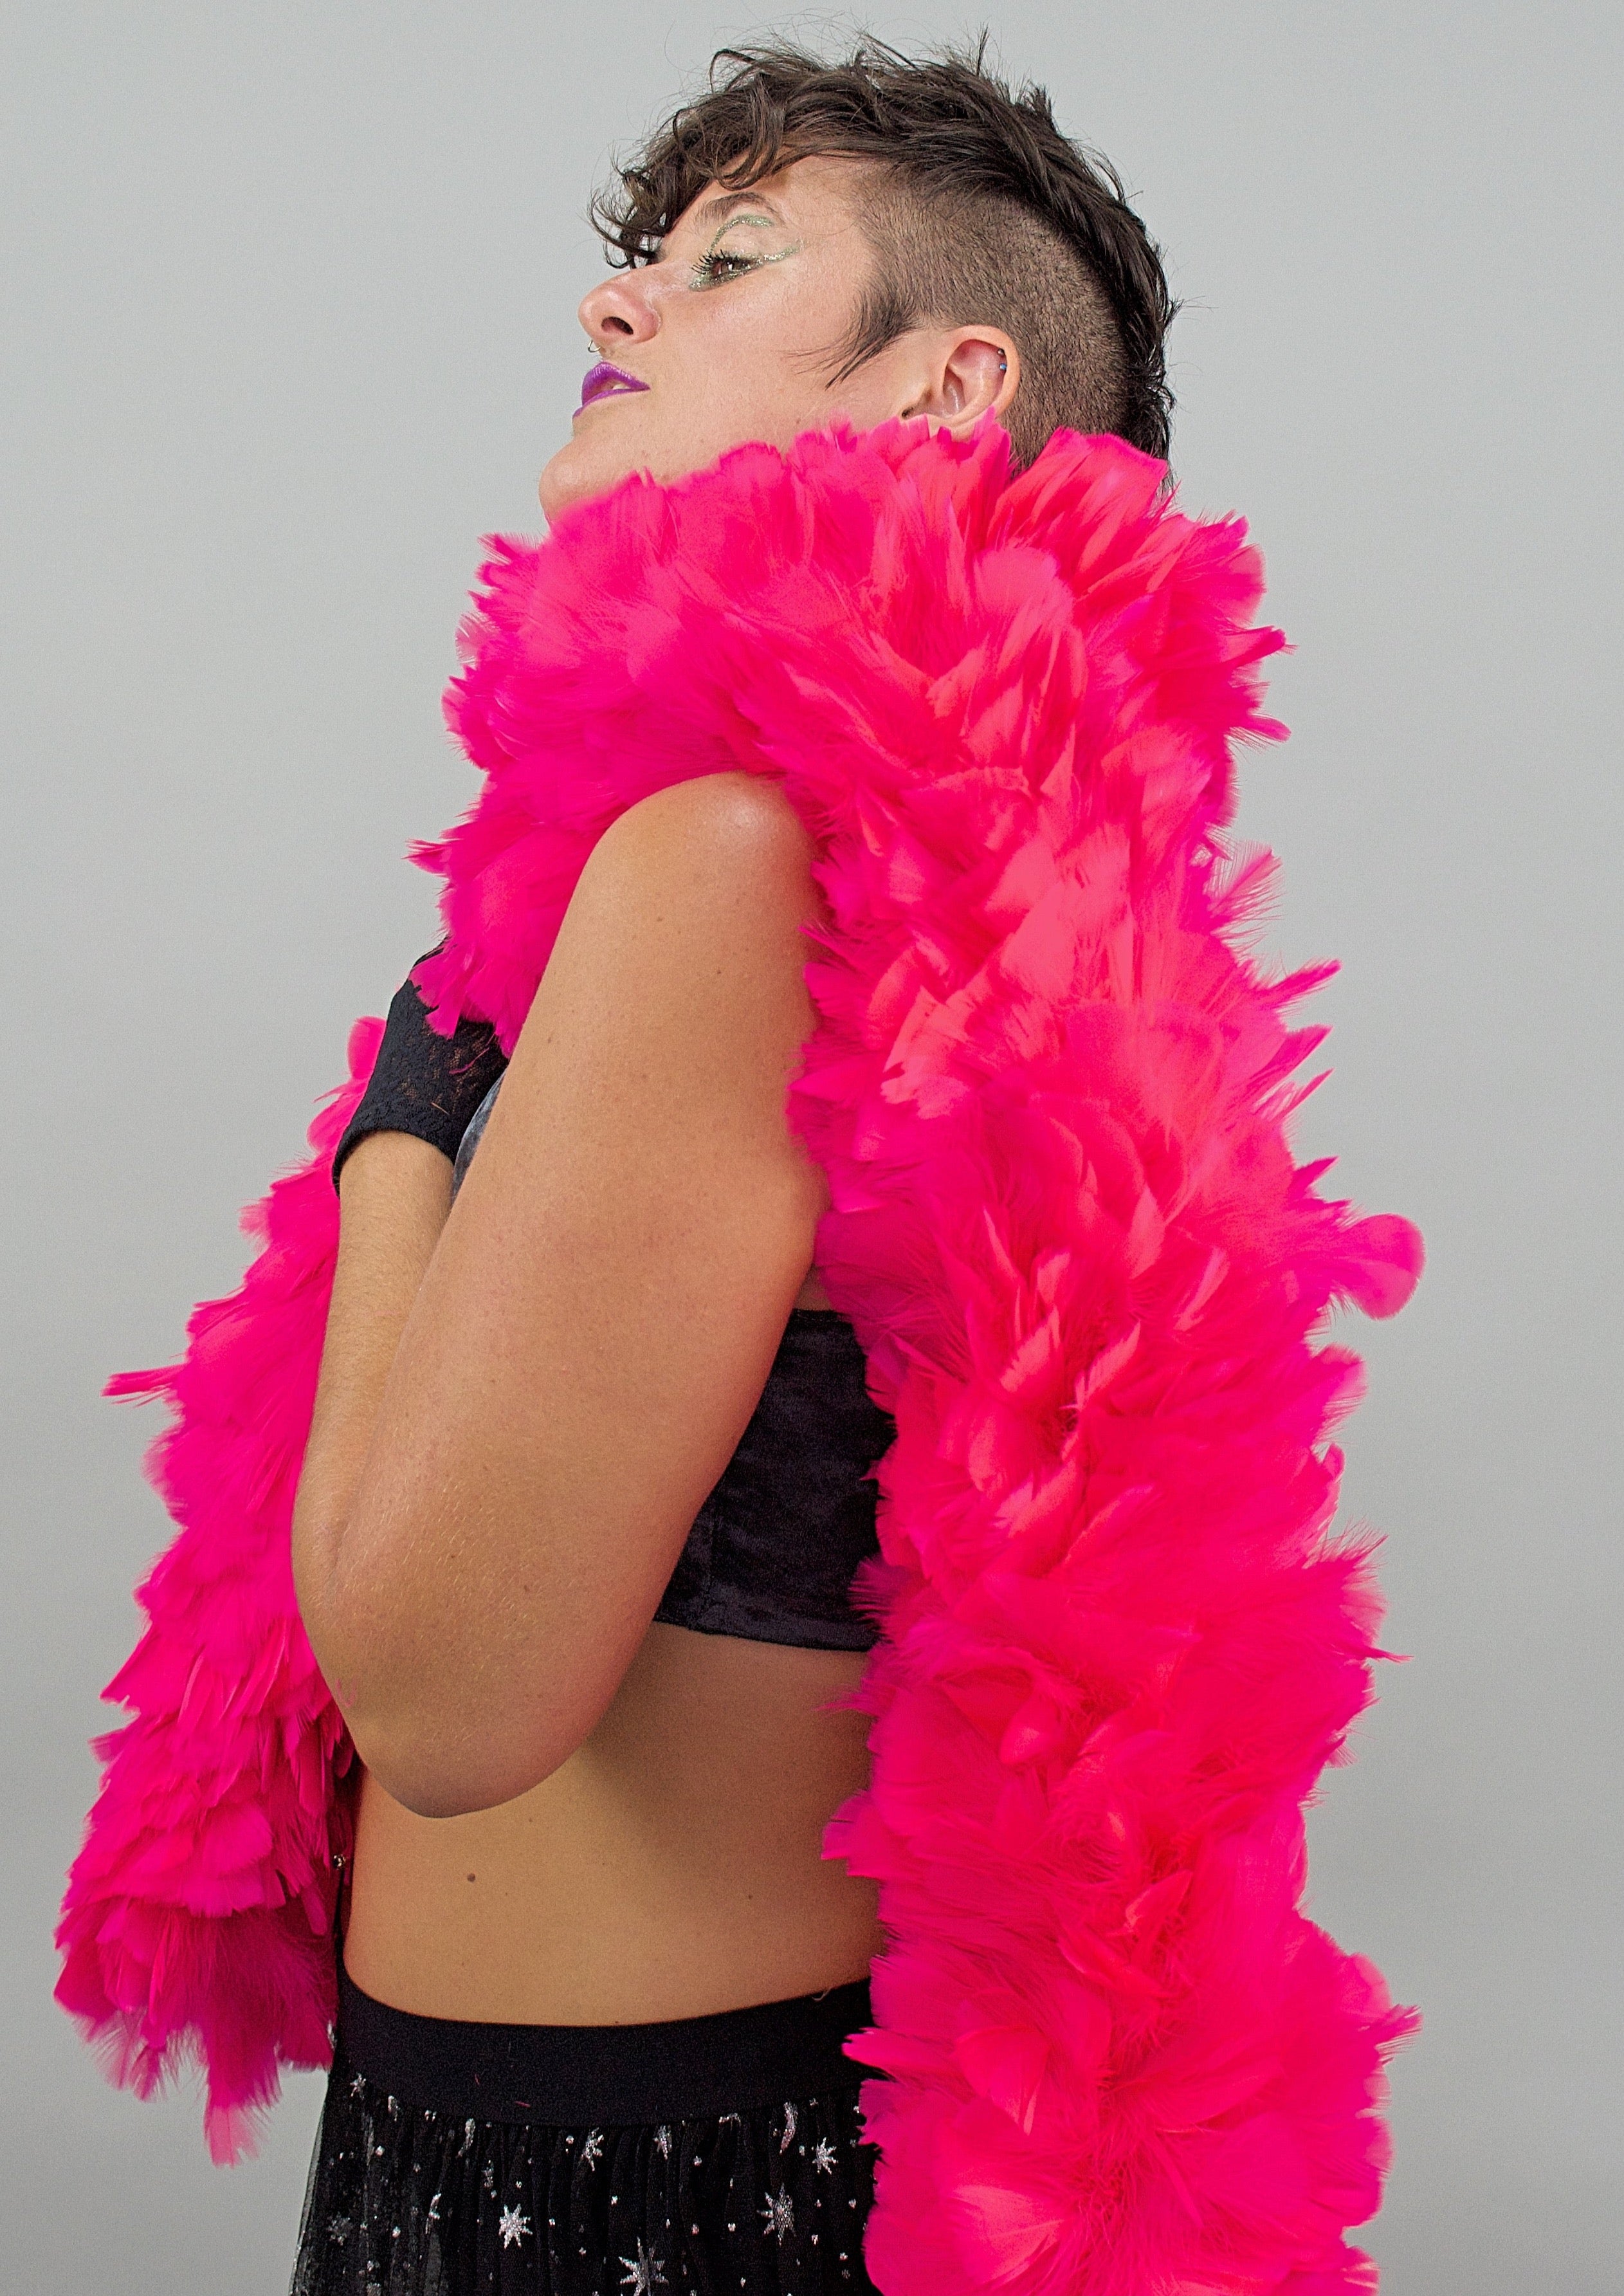 The Barbie Hot Pink Turkey Feather Boa